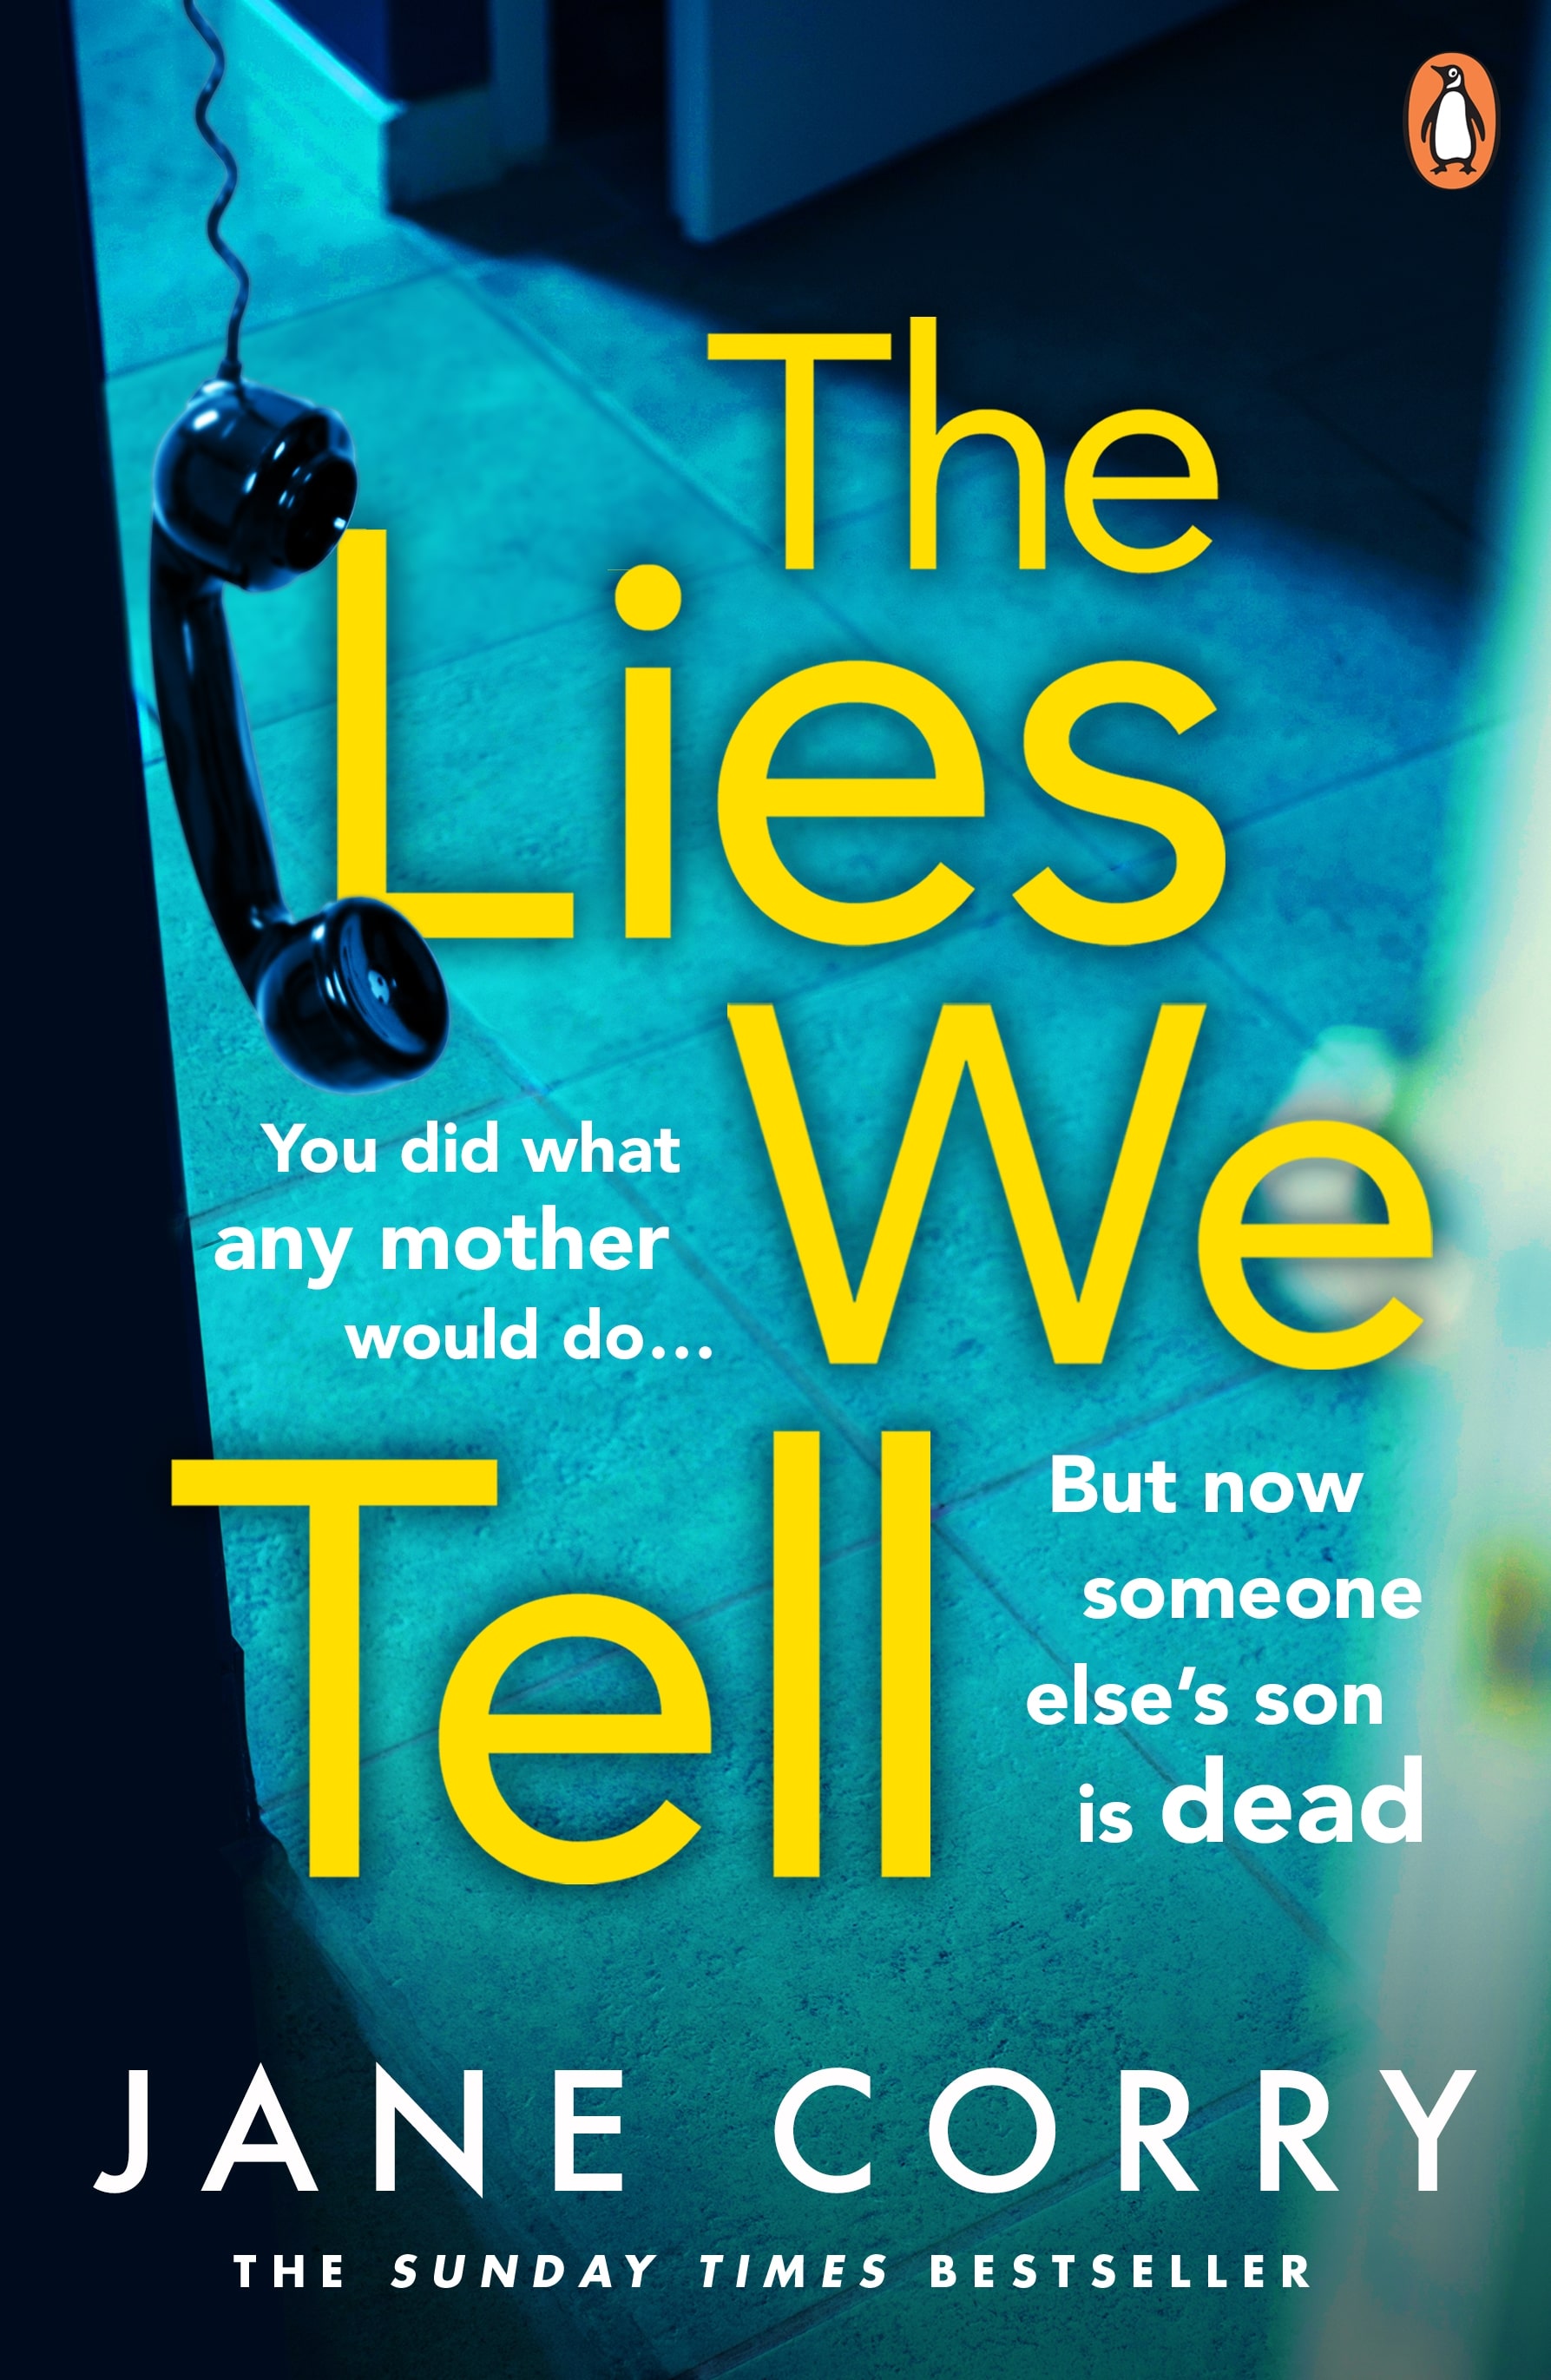 Jane Corry books in order: The Lies We Tell, book 6